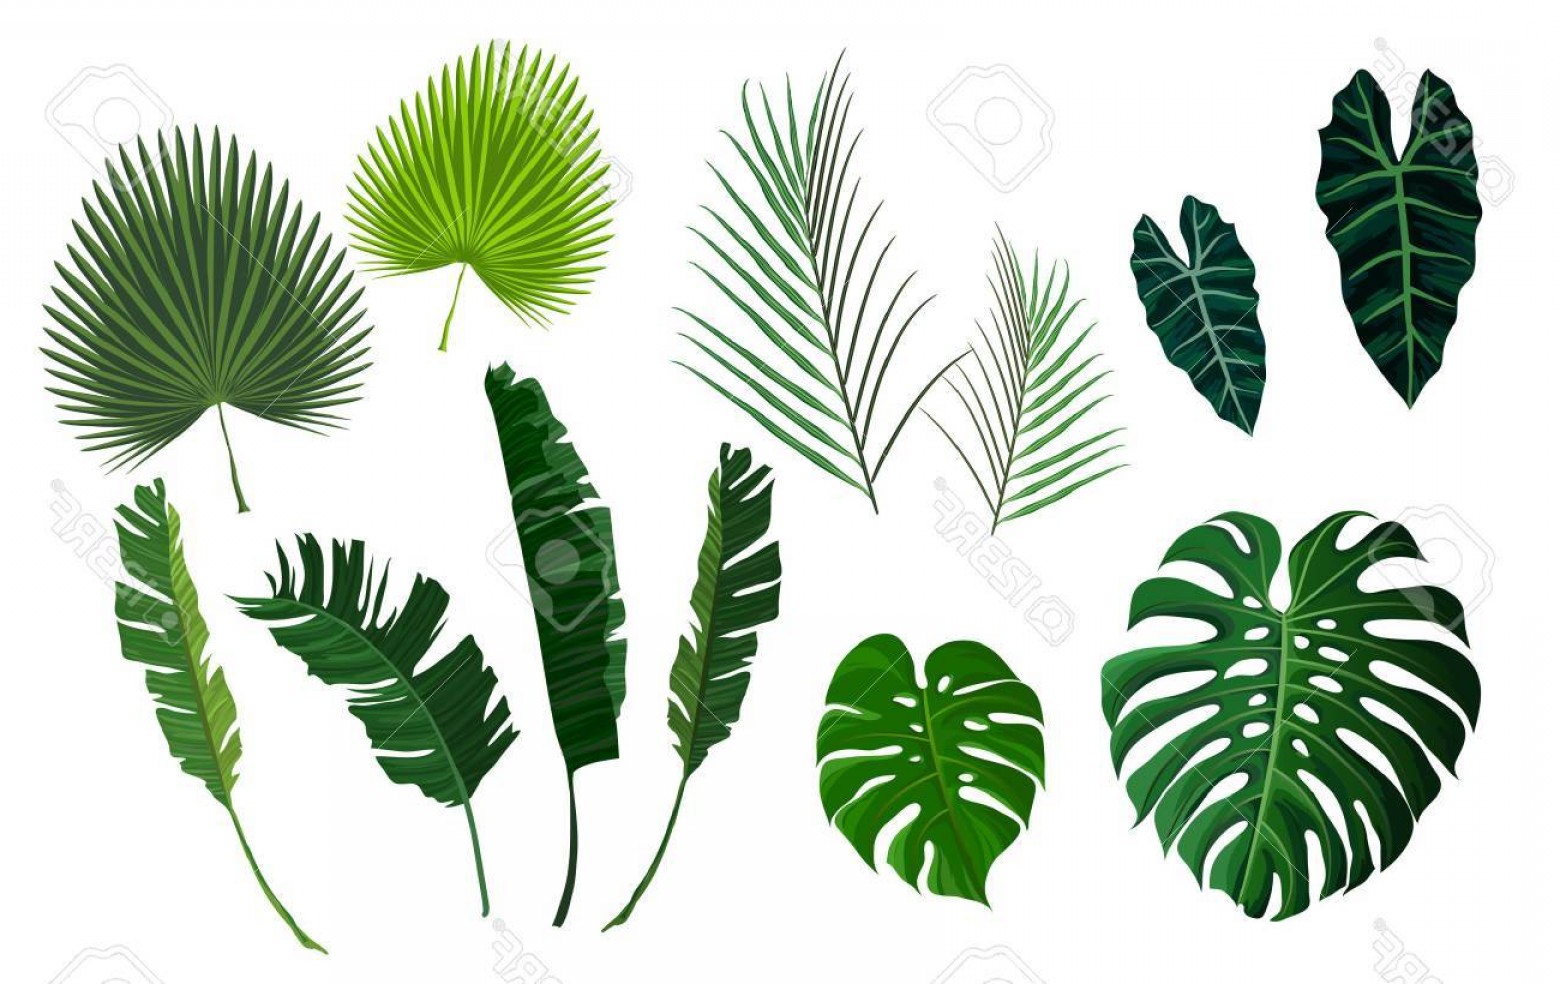 Download Jungle Leaves Vector at Vectorified.com | Collection of ...